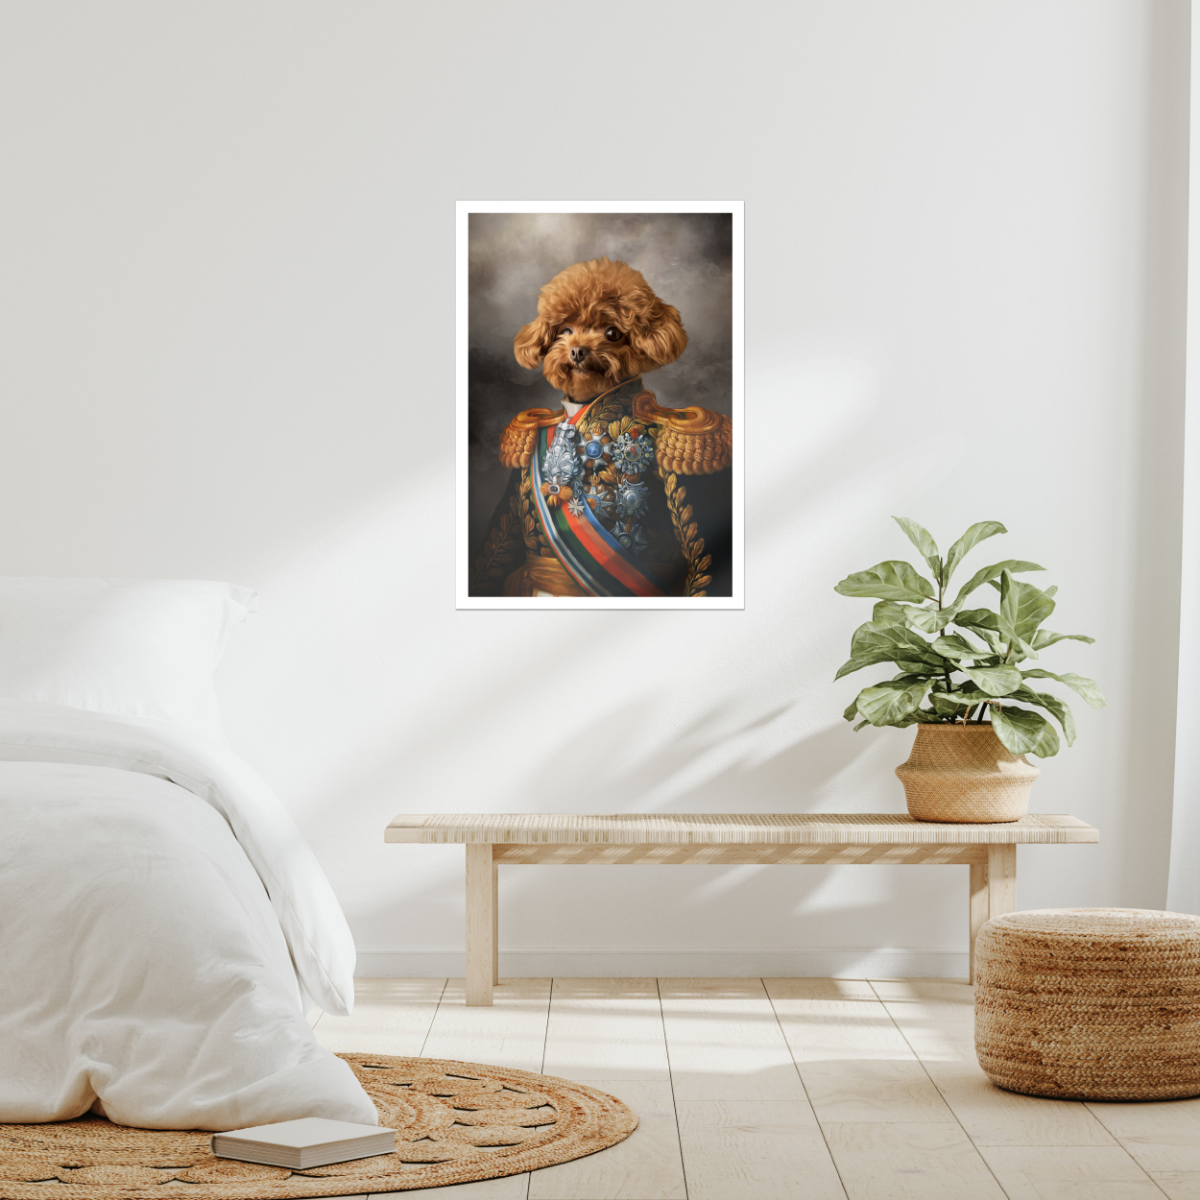 The First Lieutenant: Custom Pet Poster - Paw & Glory - #pet portraits# - #dog portraits# - #pet portraits uk#Paw & Glory, paw and glory, portraits dogs, my pet portrait pop art pet personalized dog paintings, custom pet oil paintings jedi dog pet portraits